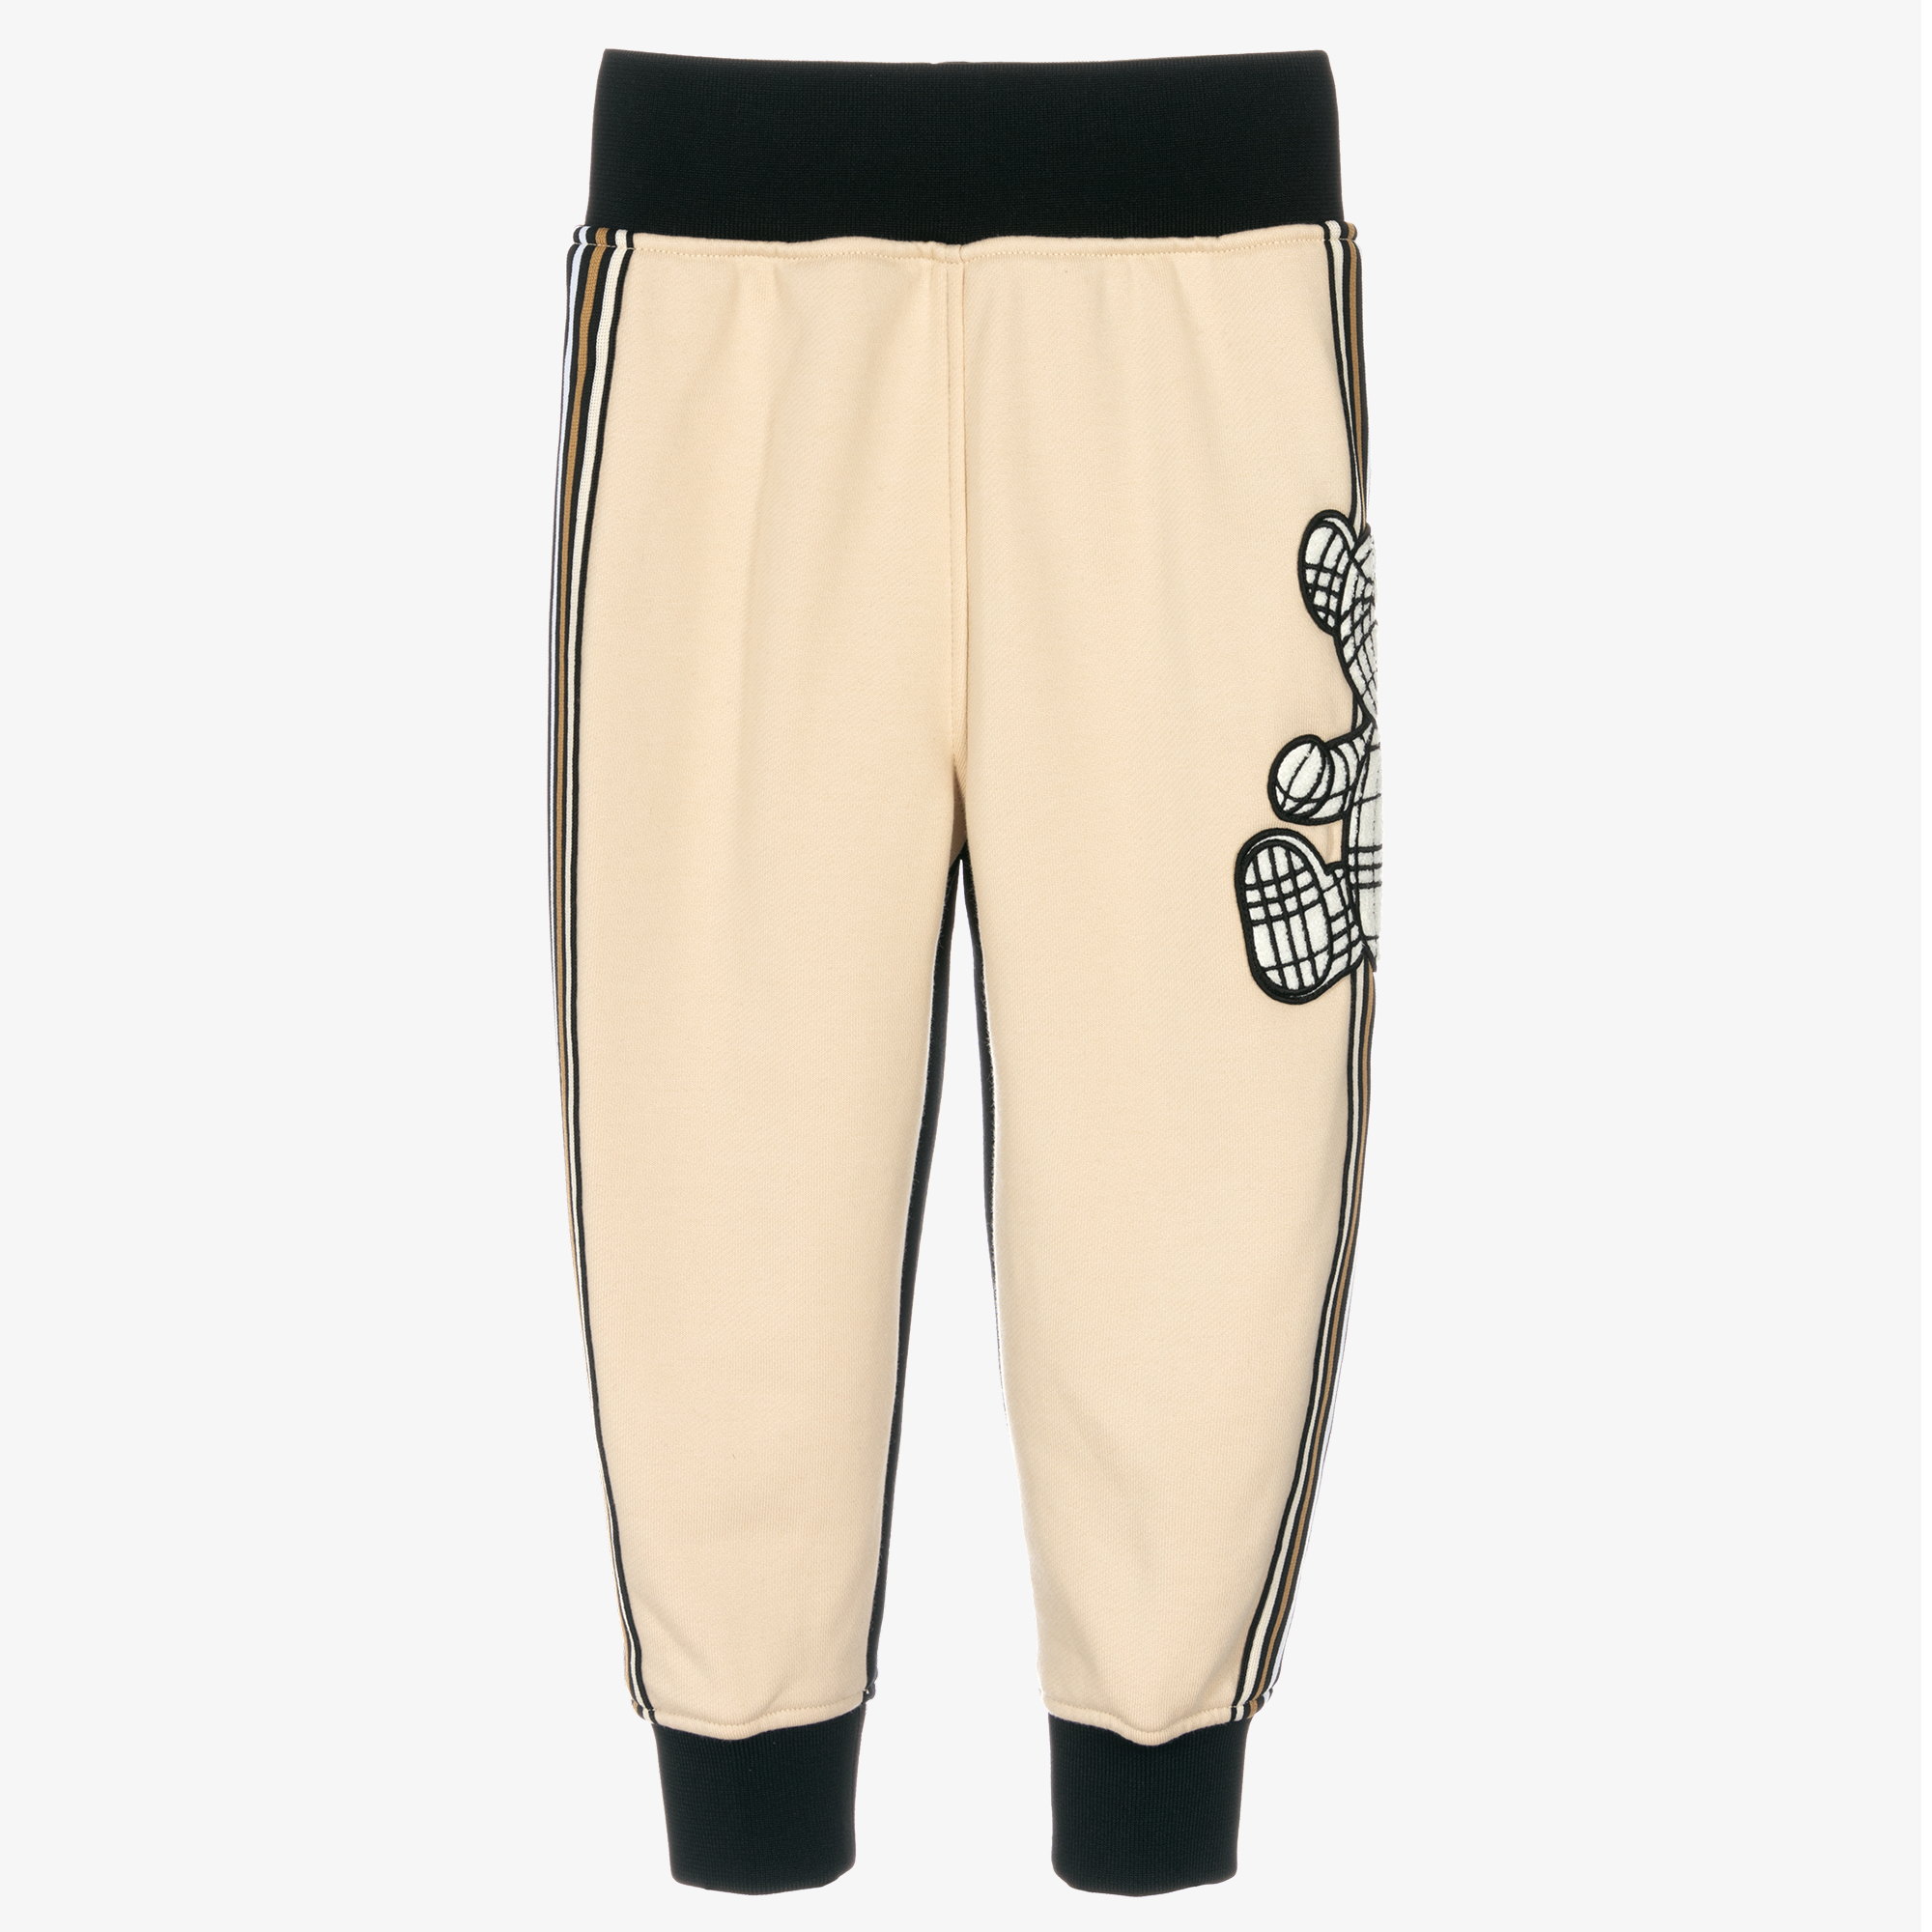 BURBERRY 7/8 pants in jogger style in camel